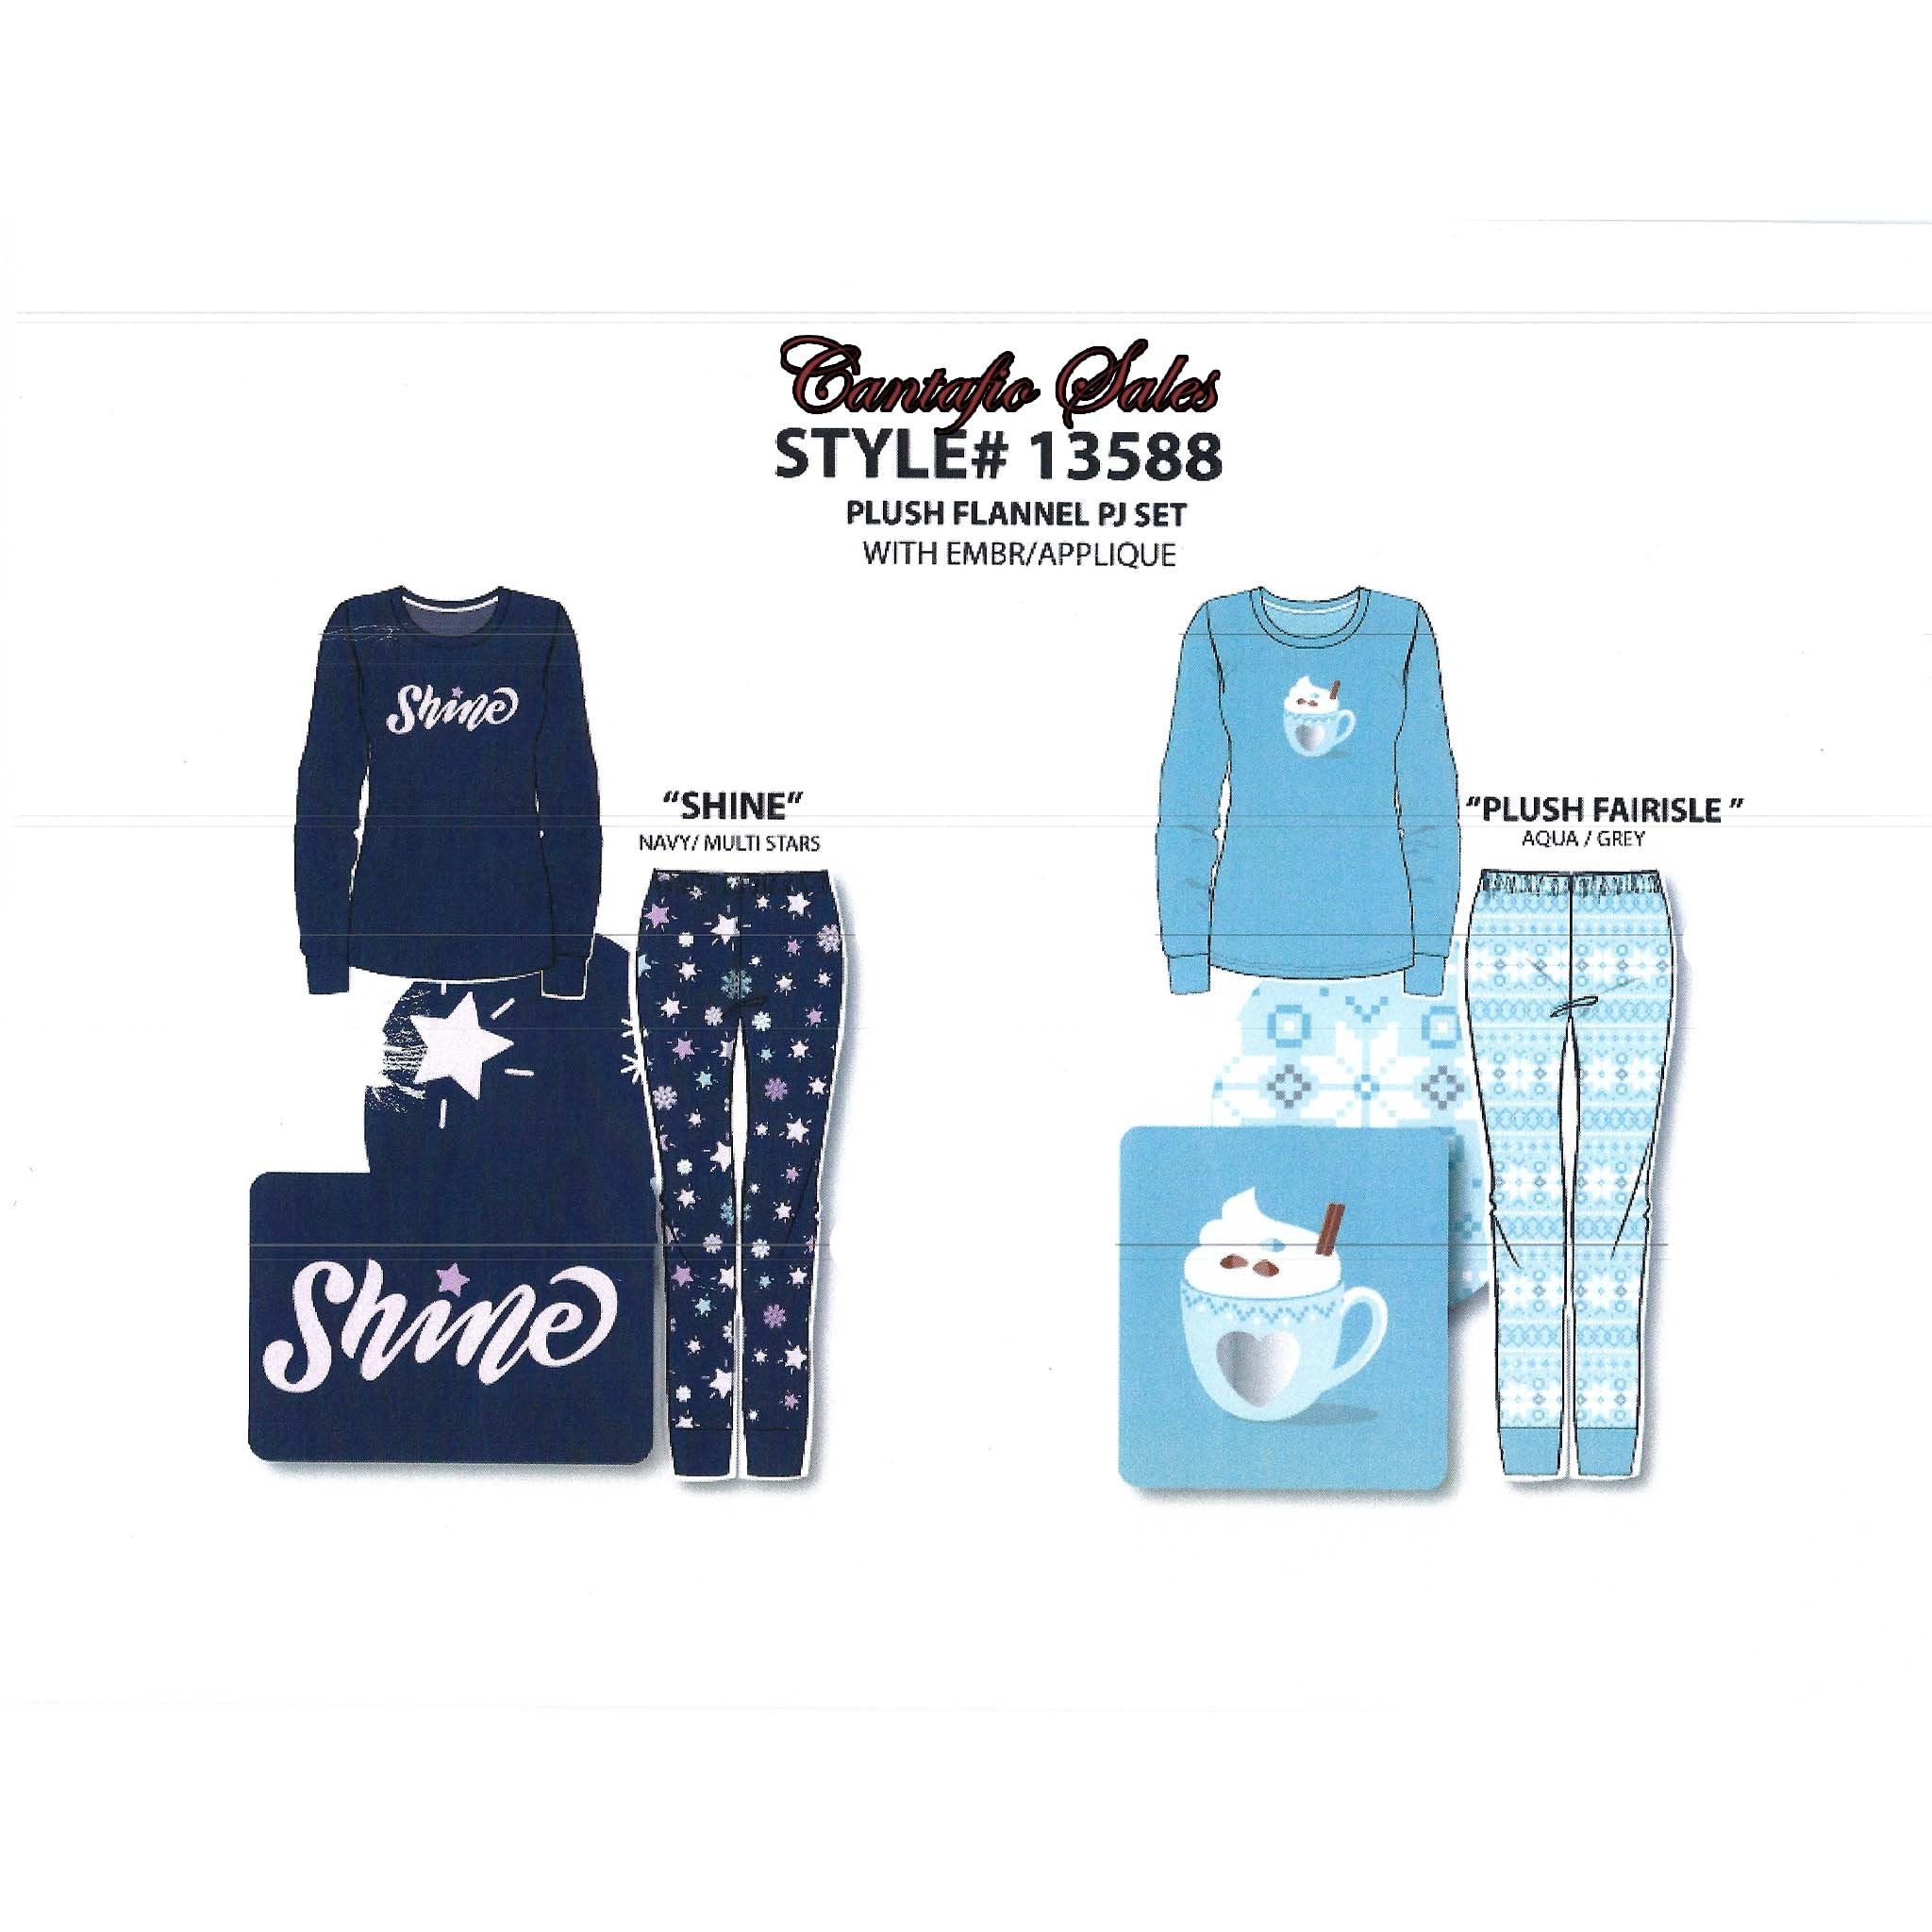 Women's Two Piece Plush Flannel Pajama Set with Solid Top & Printed Pants